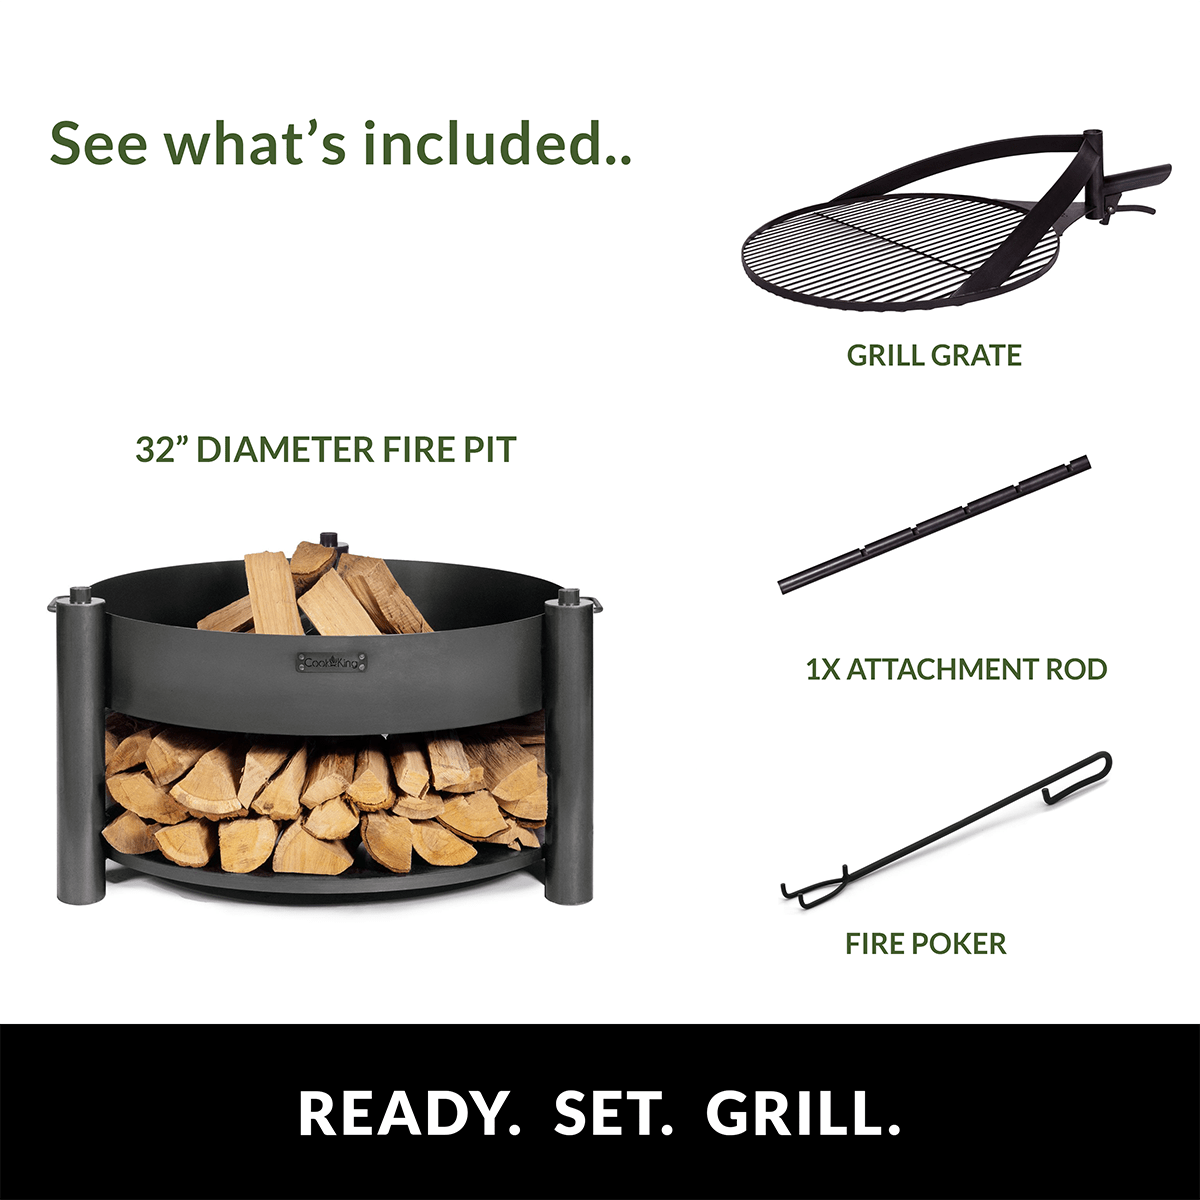 Grand Hearth 32" Standard Grill Set - Good Directions